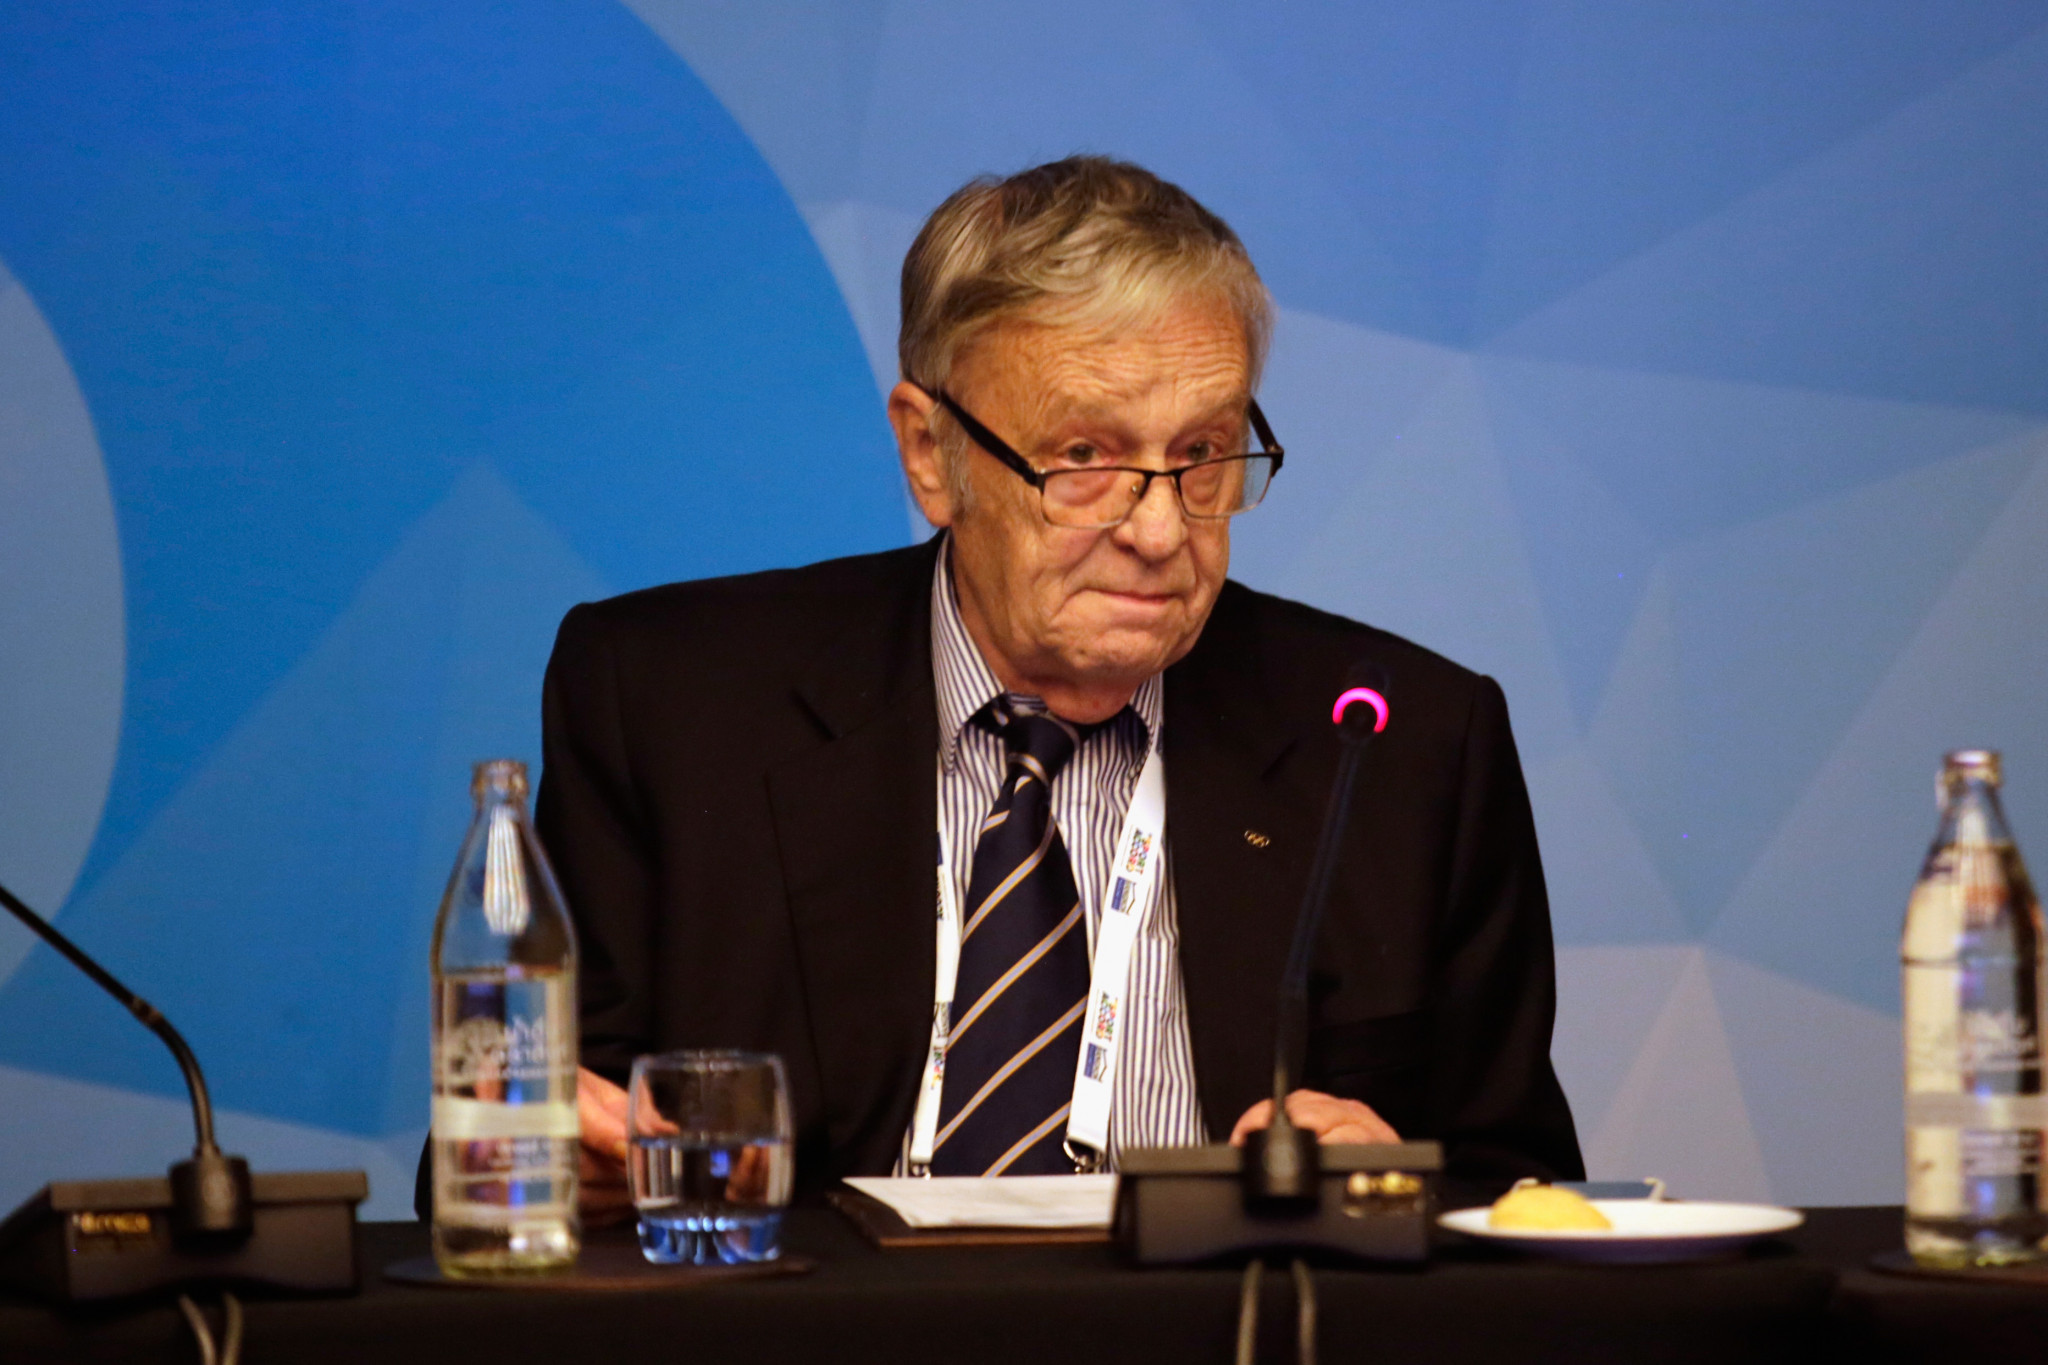 Gian-Franco Kasper headed the Association of International Olympic Winter Sports Federations General Assembly ©Getty Images